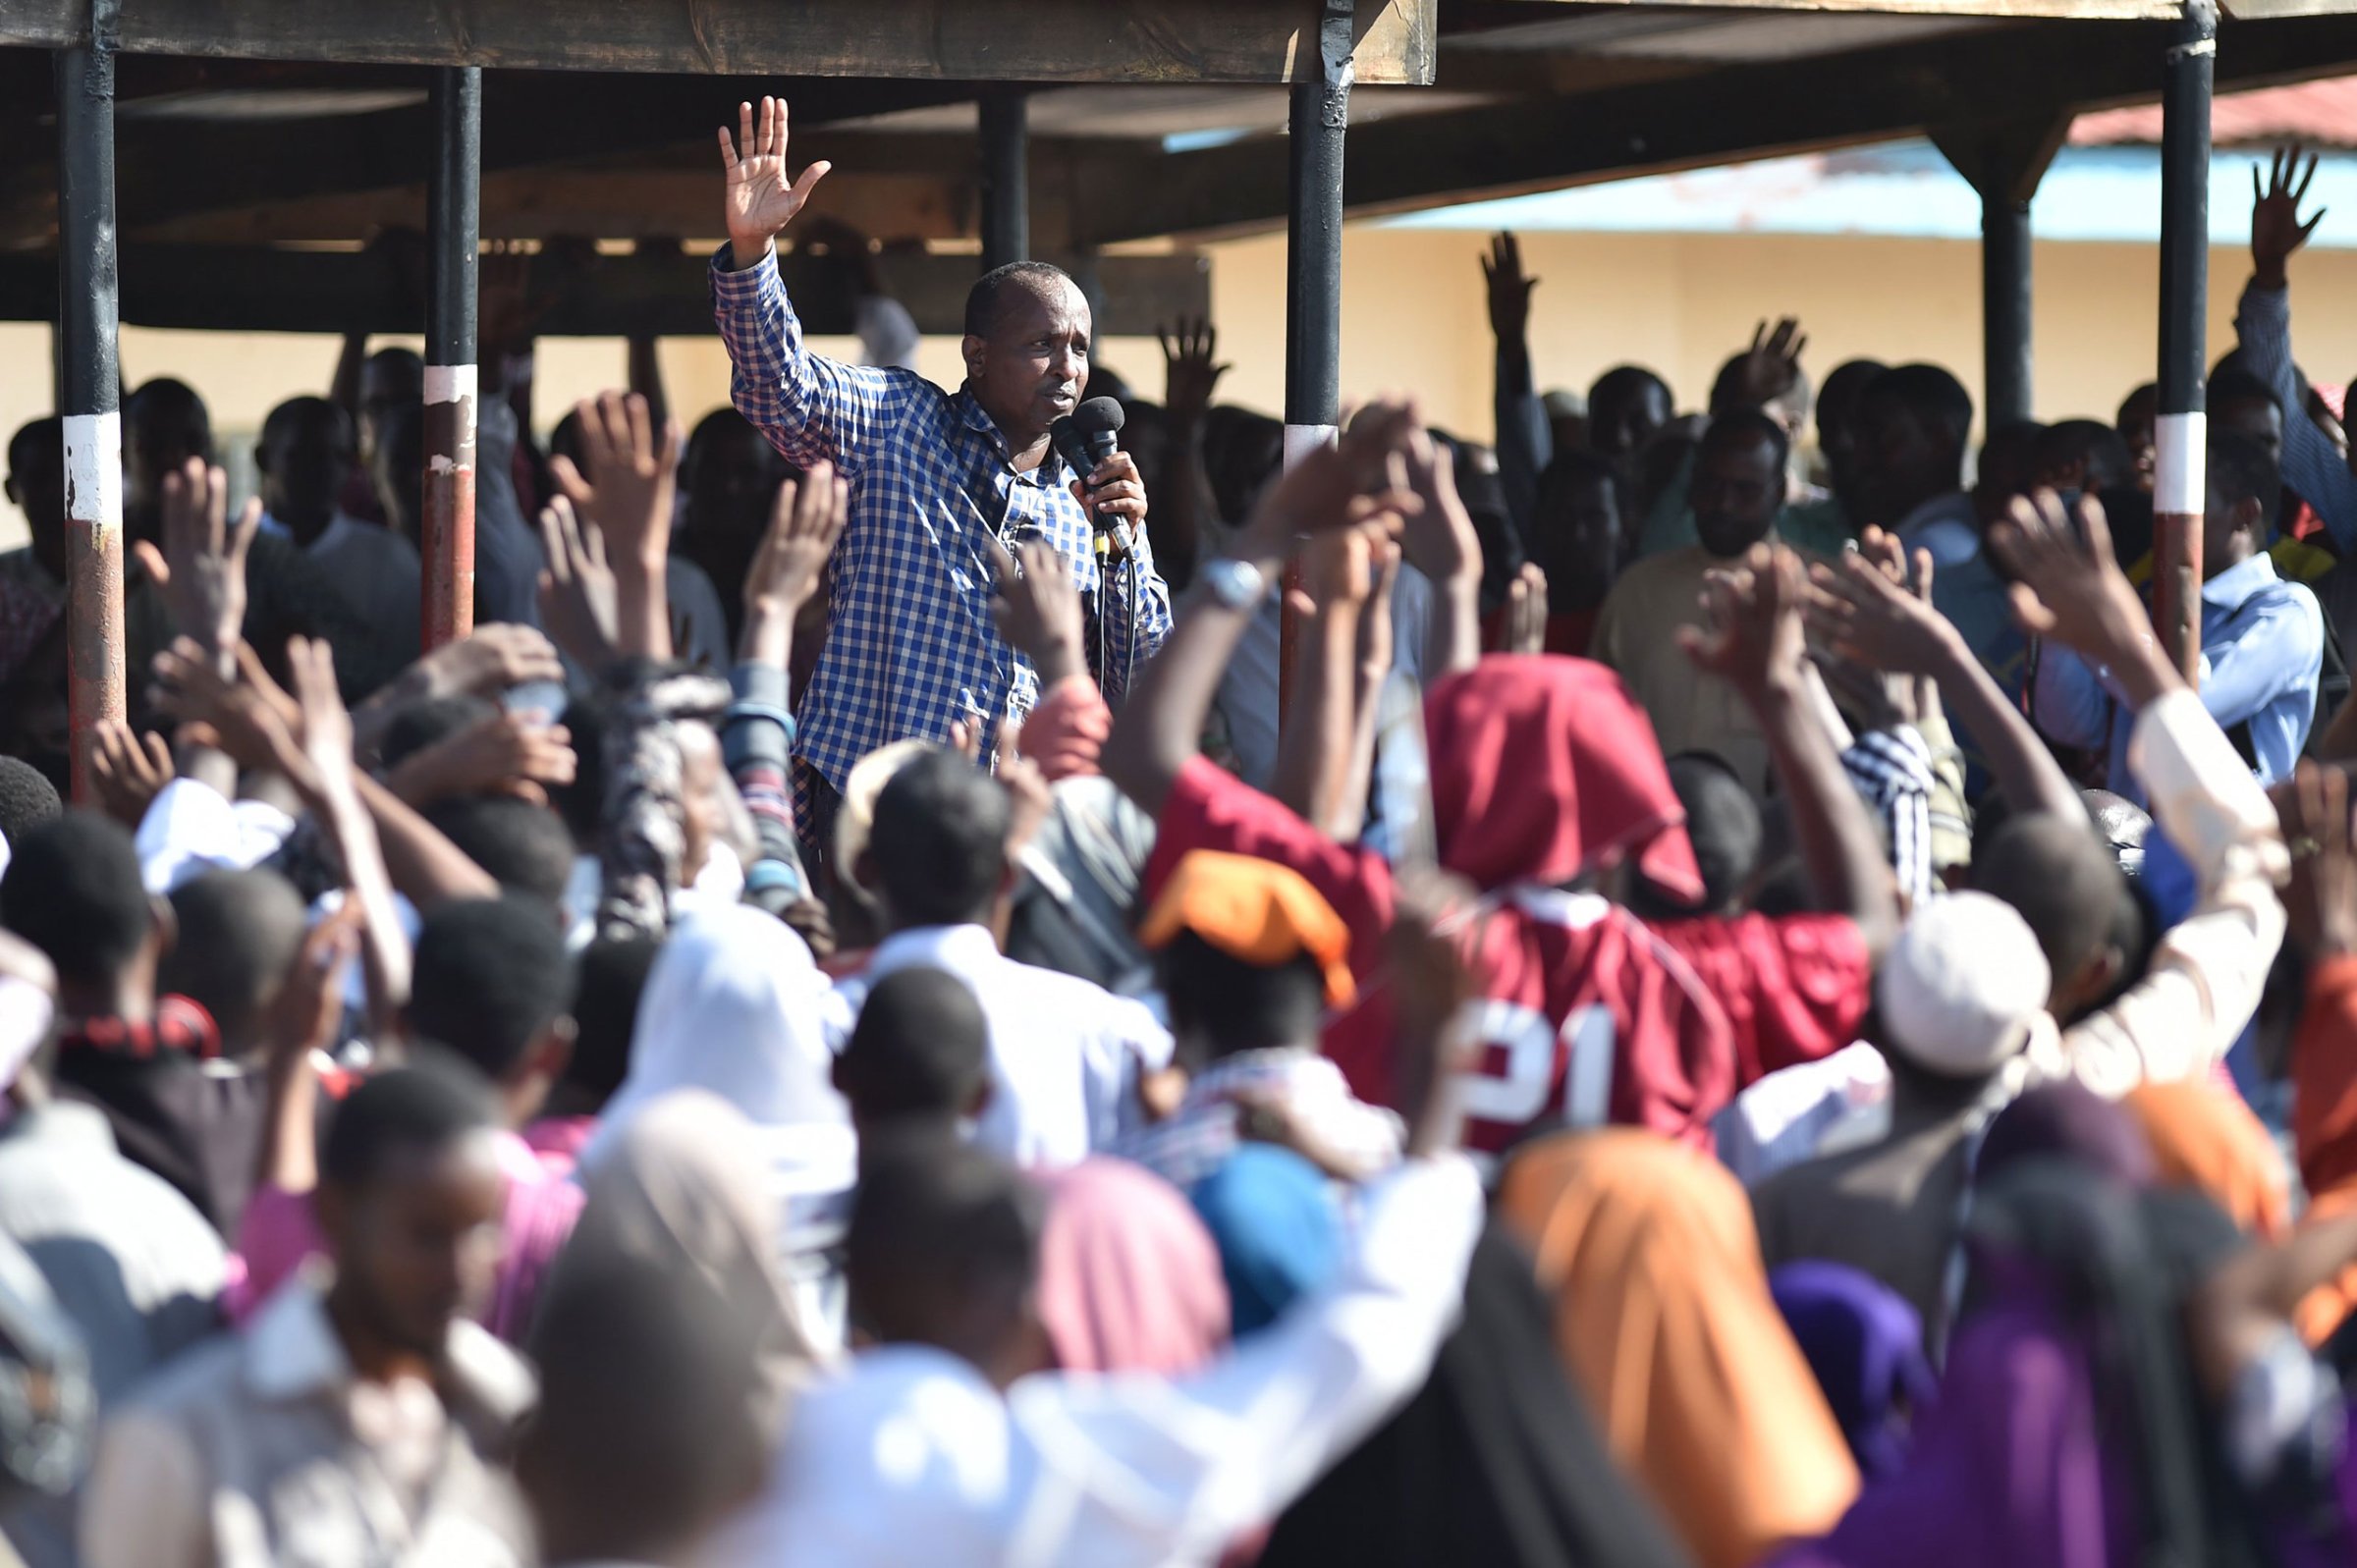 Kenya's National Assembly majority leader Aden Duale delivers a speech during a rally in Garissa, Kenya, on April 3, 2015. More than one thousand local residents attended the rally to emphasis security and condemn terrorist activities.